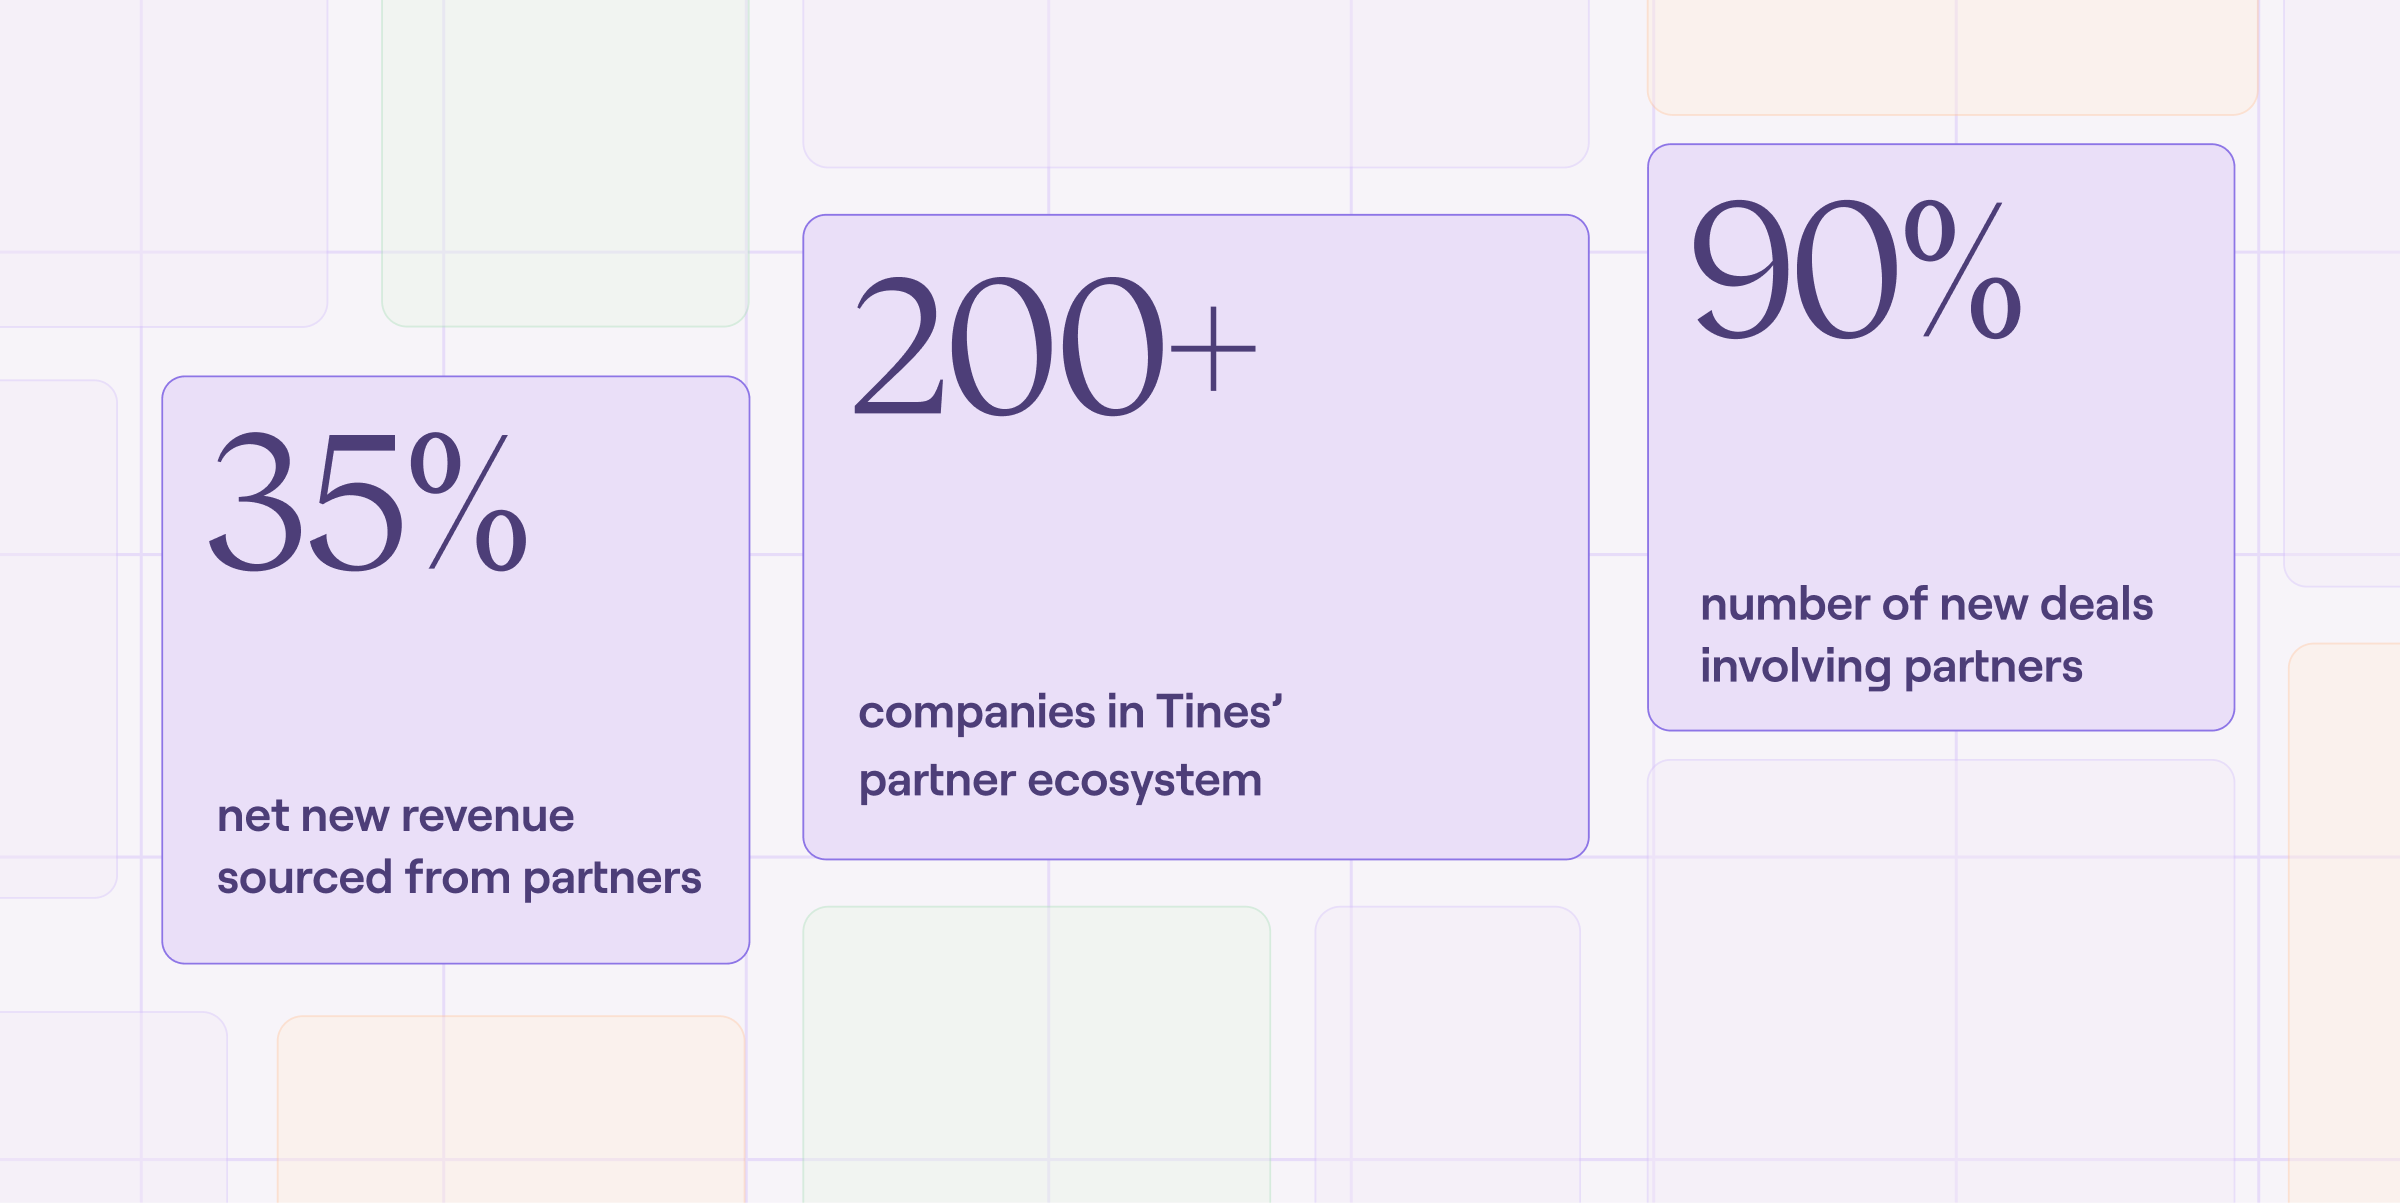 Data blocks: 200+ companies in Tines’ partner ecosystem; 90% number of new deals involving partners; 35% net new revenue sourced from partners